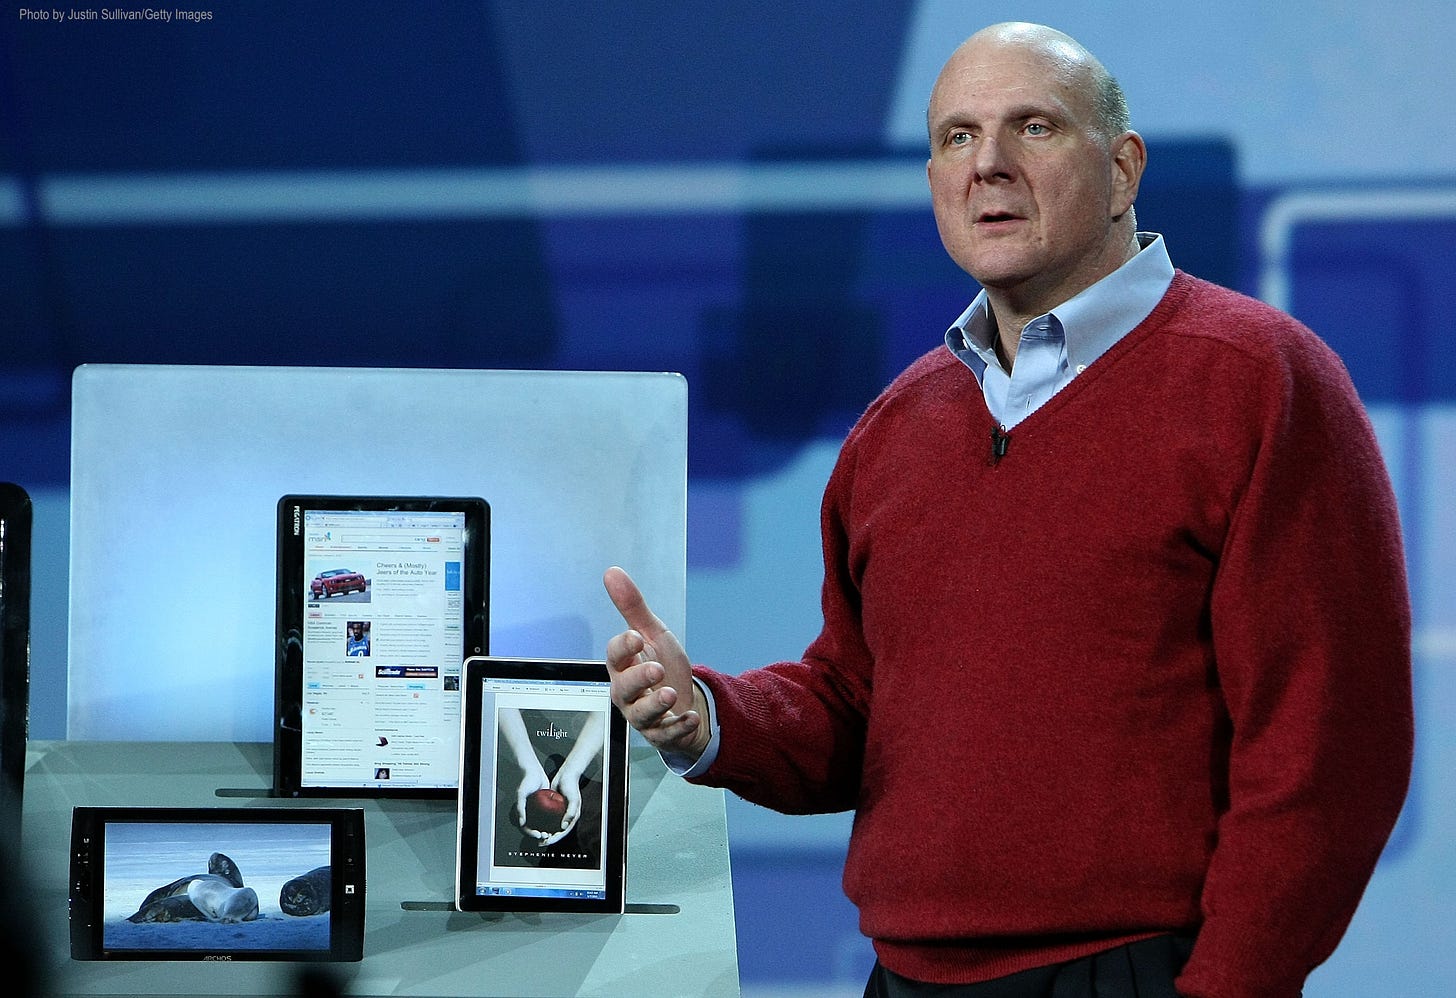 Steve Ballmer on stage pointing at some Windows 7 slate computers.